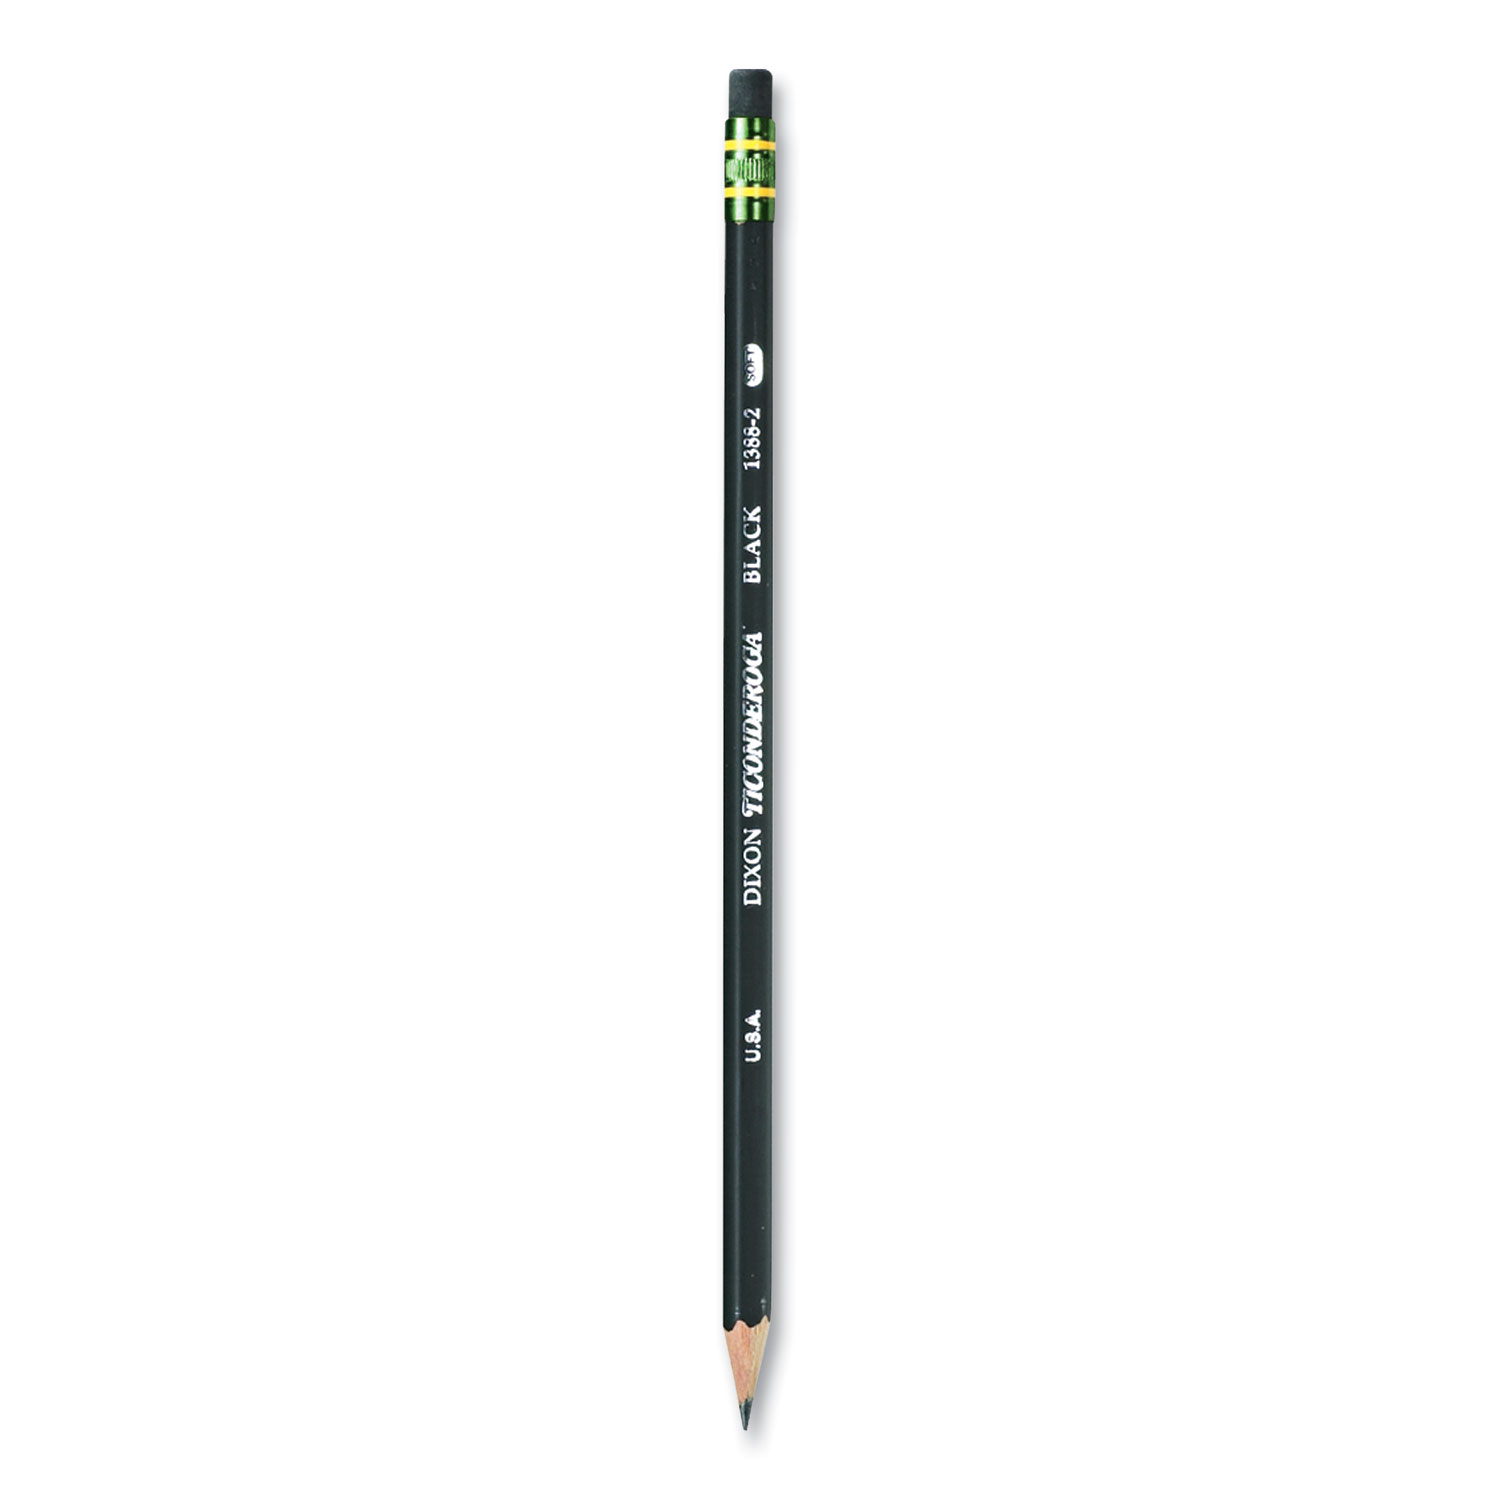 General's Non-Toxic Smooth Artists Graphite Drawing Pencil, Assorted Tip, Black, Pack of 4